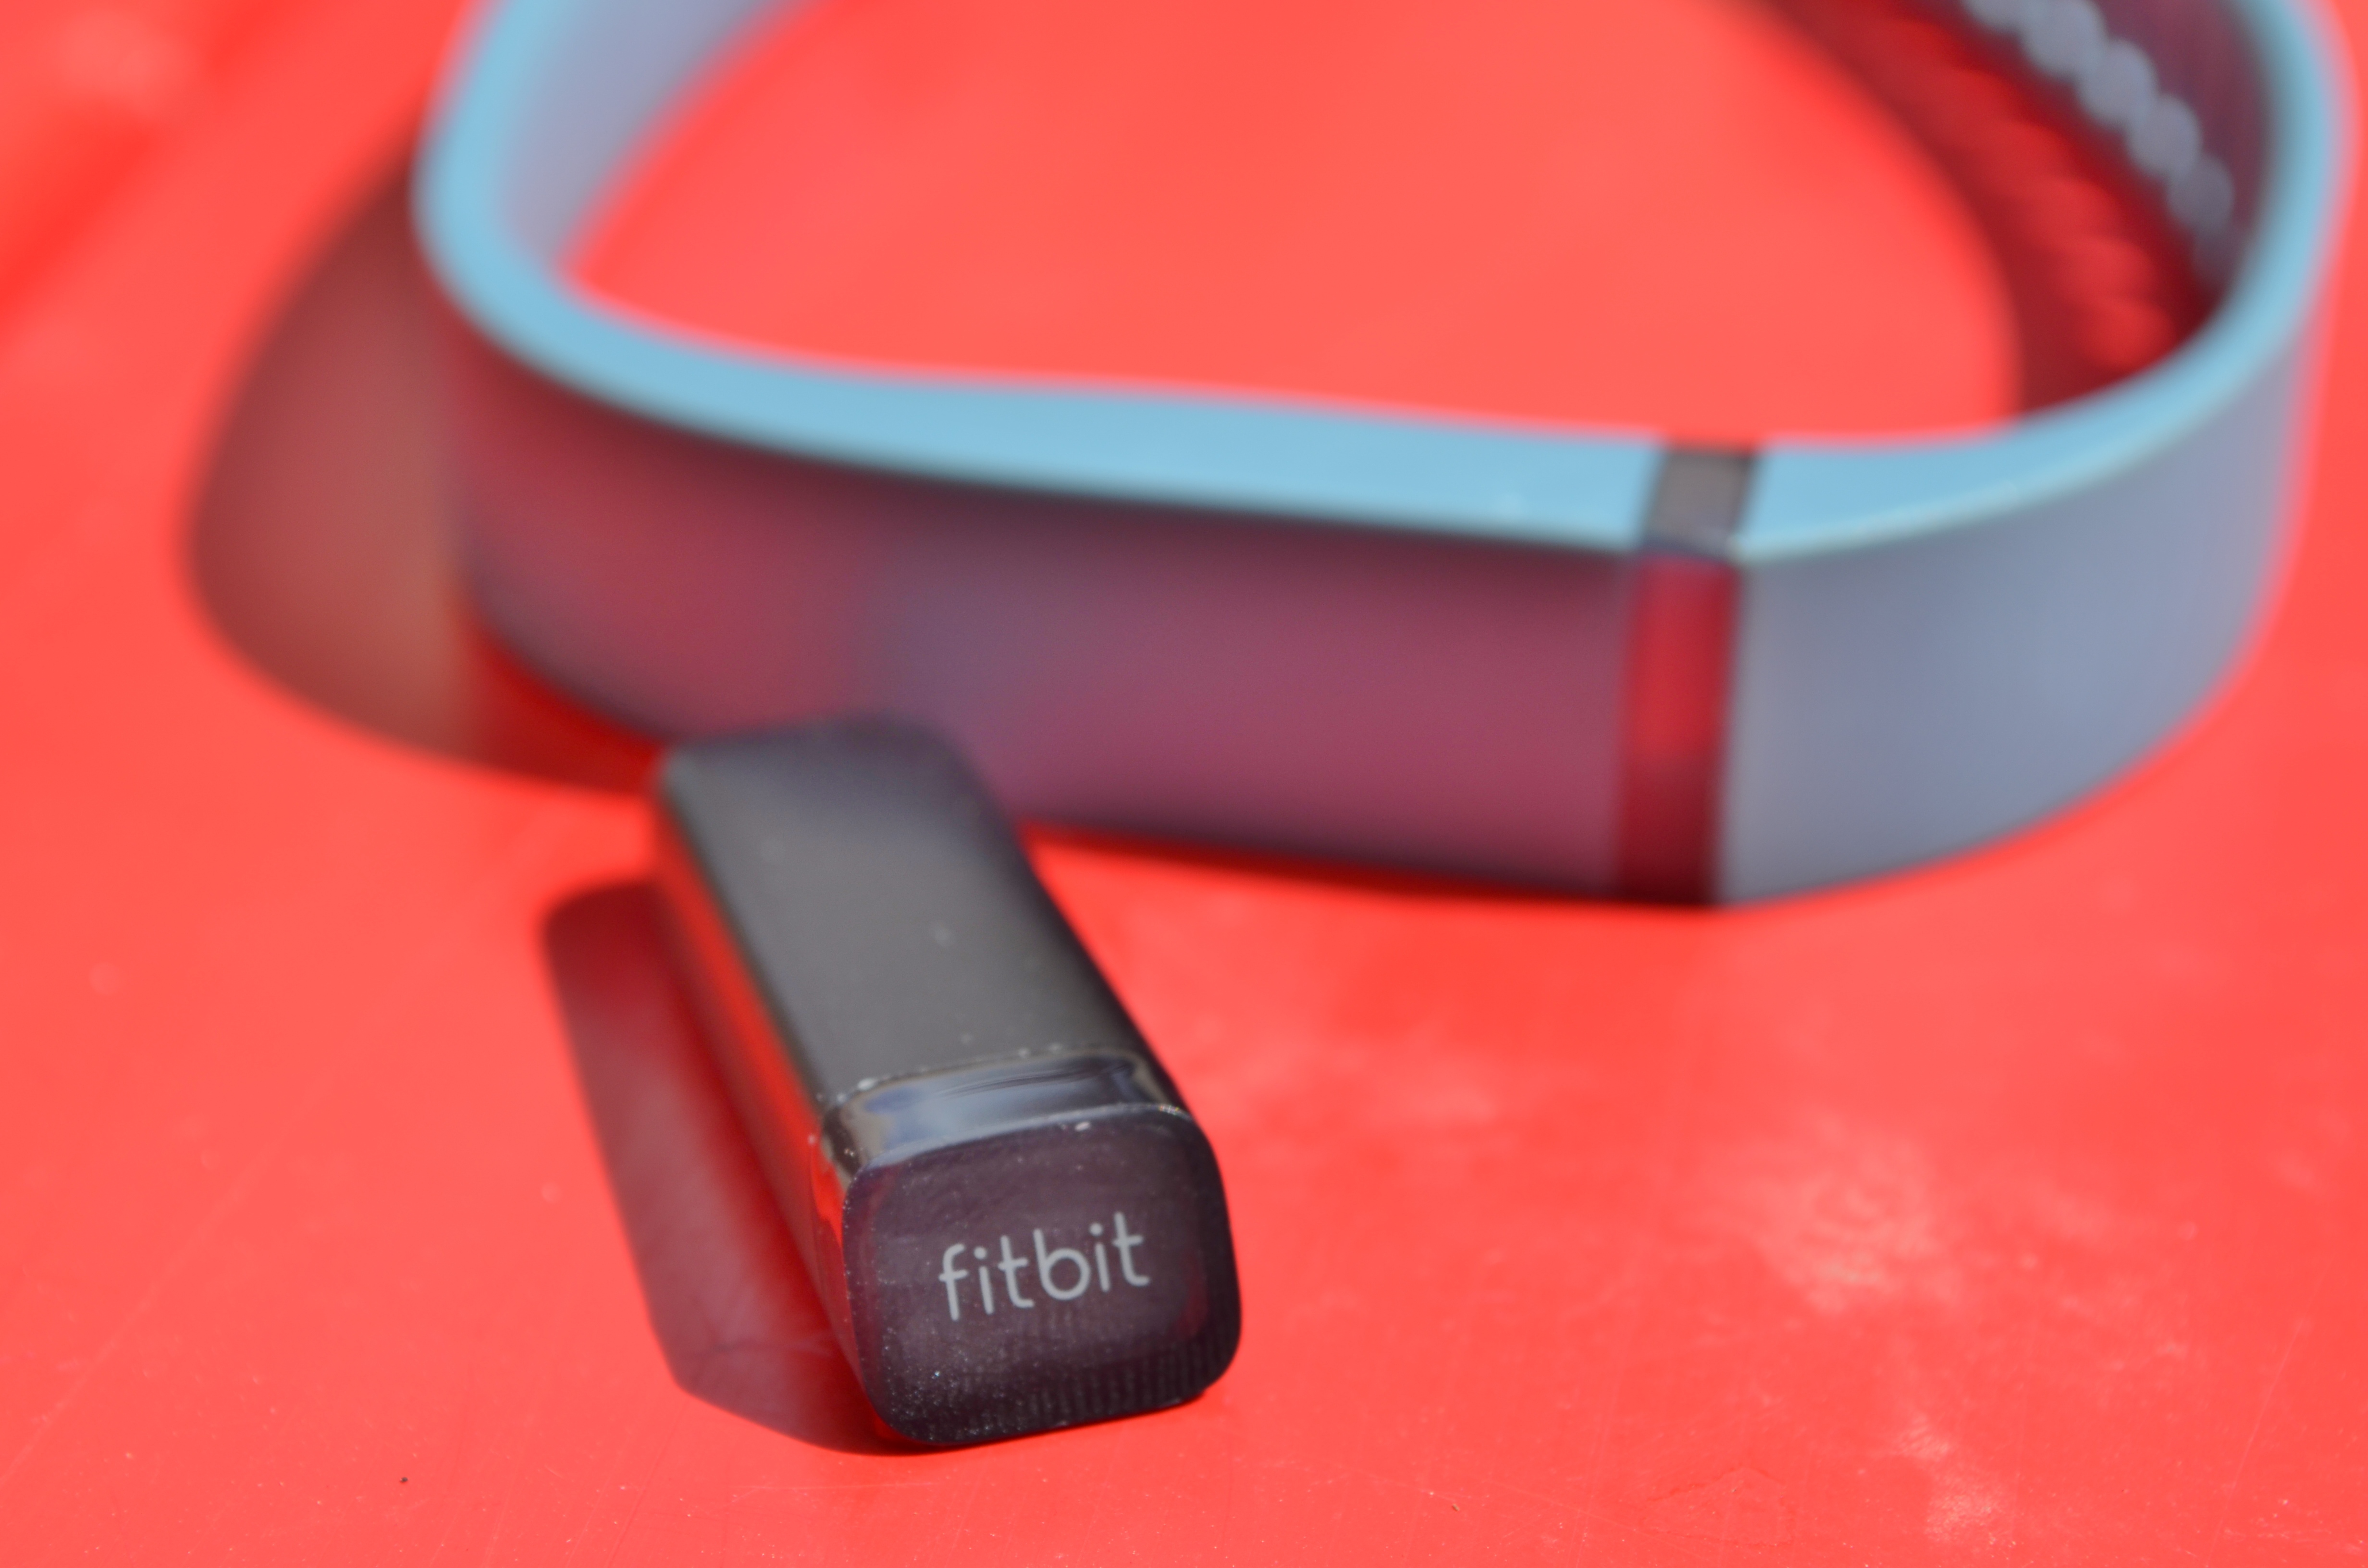 is there a fitbit flex type app for my iphone?